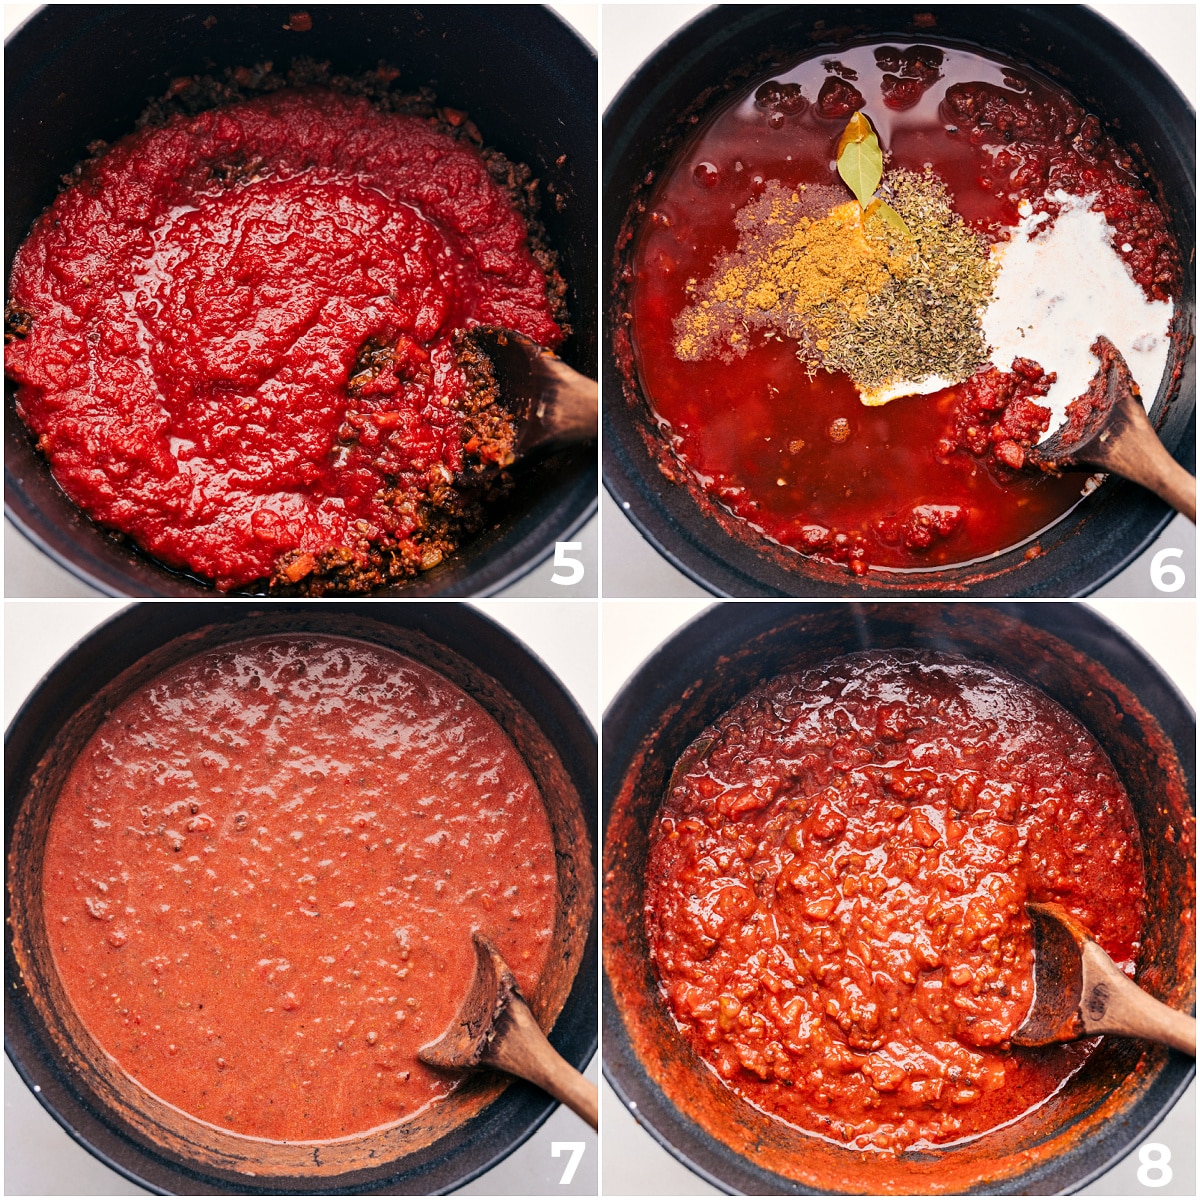 The crushed tomatoes, seasonings, and cream being added to the pot for this easy spaghetti bolognese.